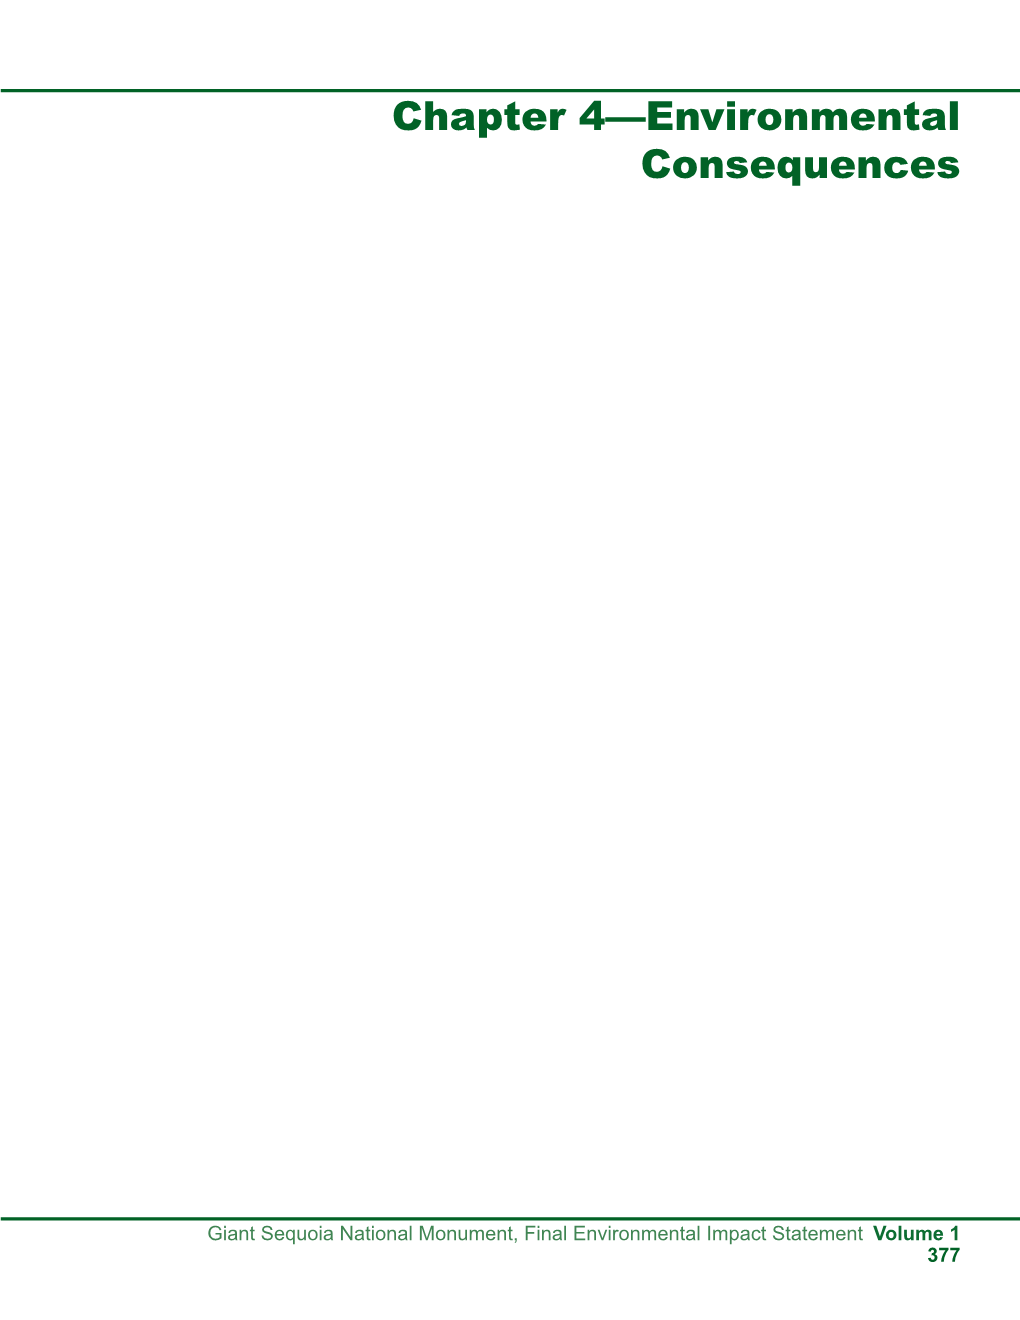 Chapter 4—Environmental Consequences